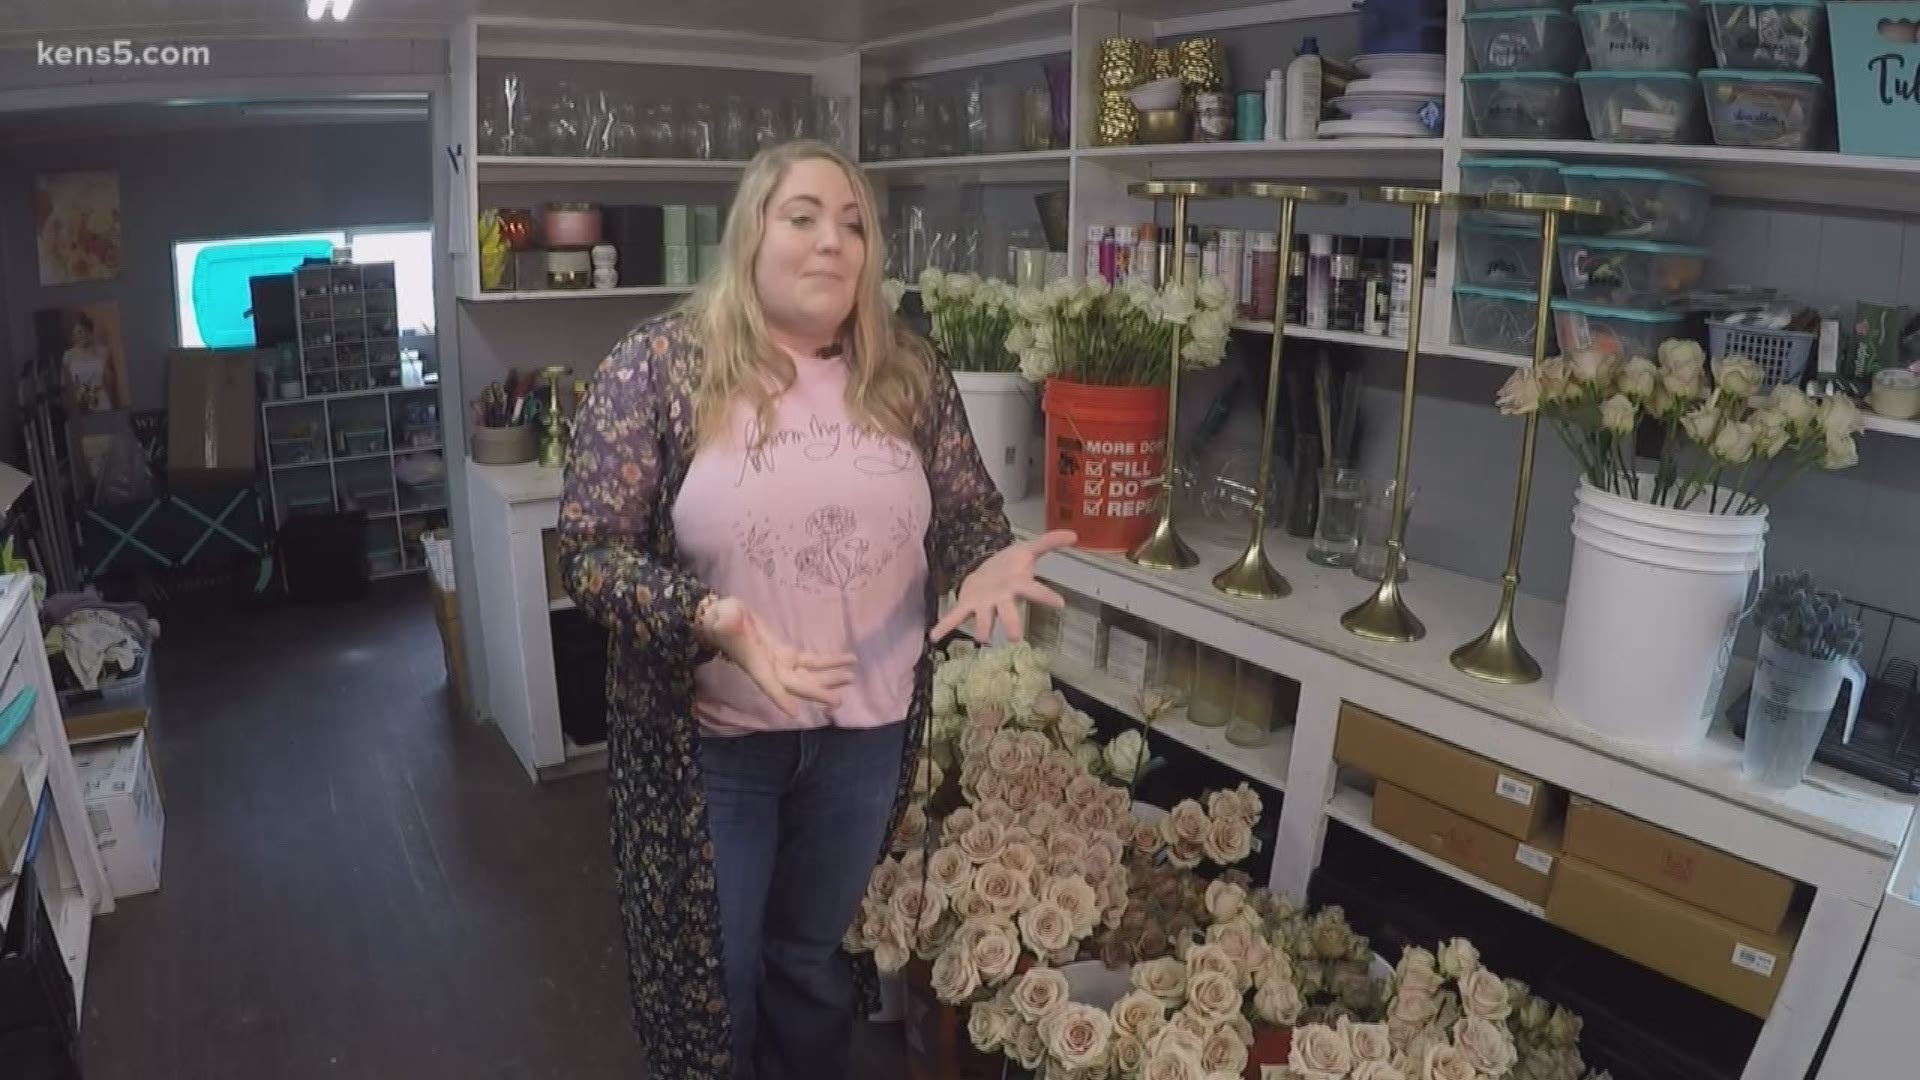 You wouldn't think the disease would impact a South Texas florists's business.